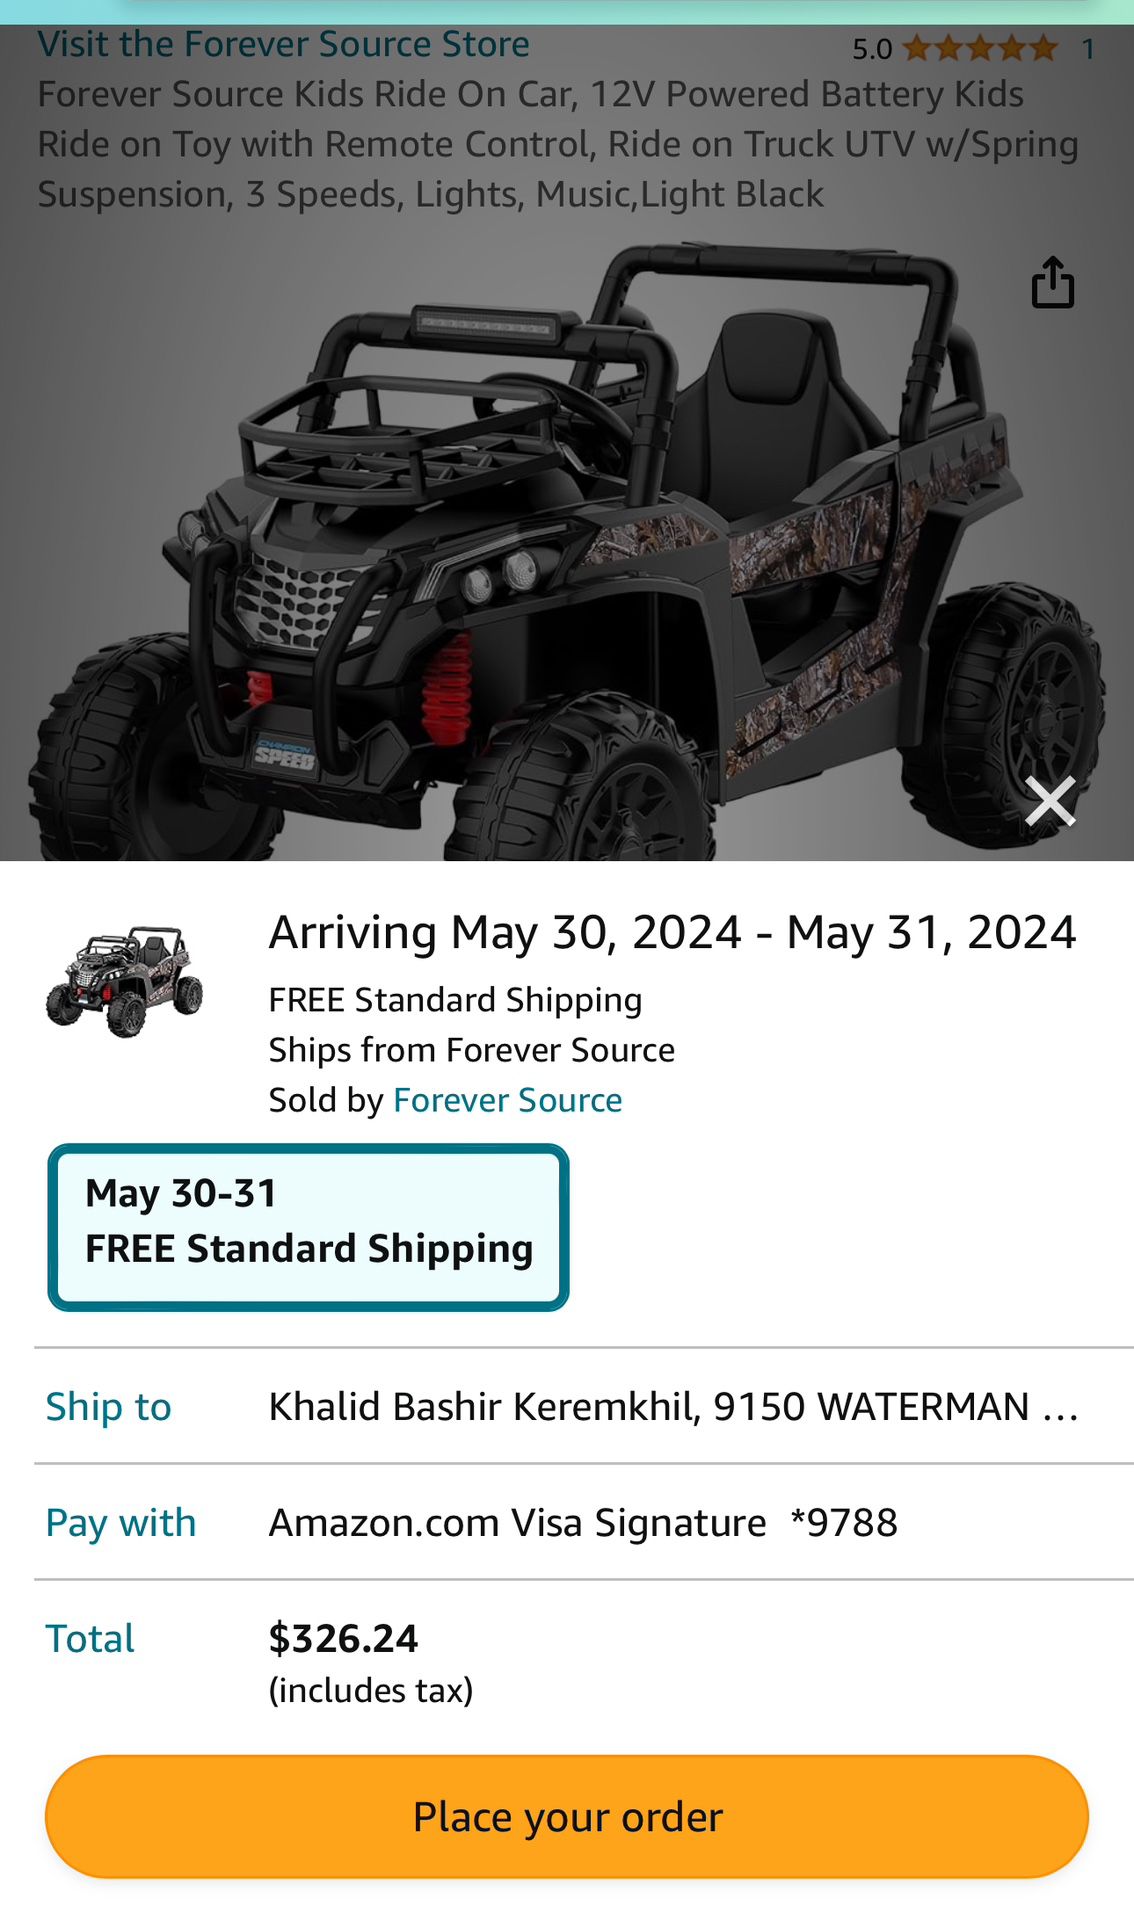 Forever Source Kids Ride On Car, 12V Powered Battery Kids Ride on Toy with Remote Control, Ride on Truck UTV w/Spring Suspension, 3 Speeds, Lights, Mu